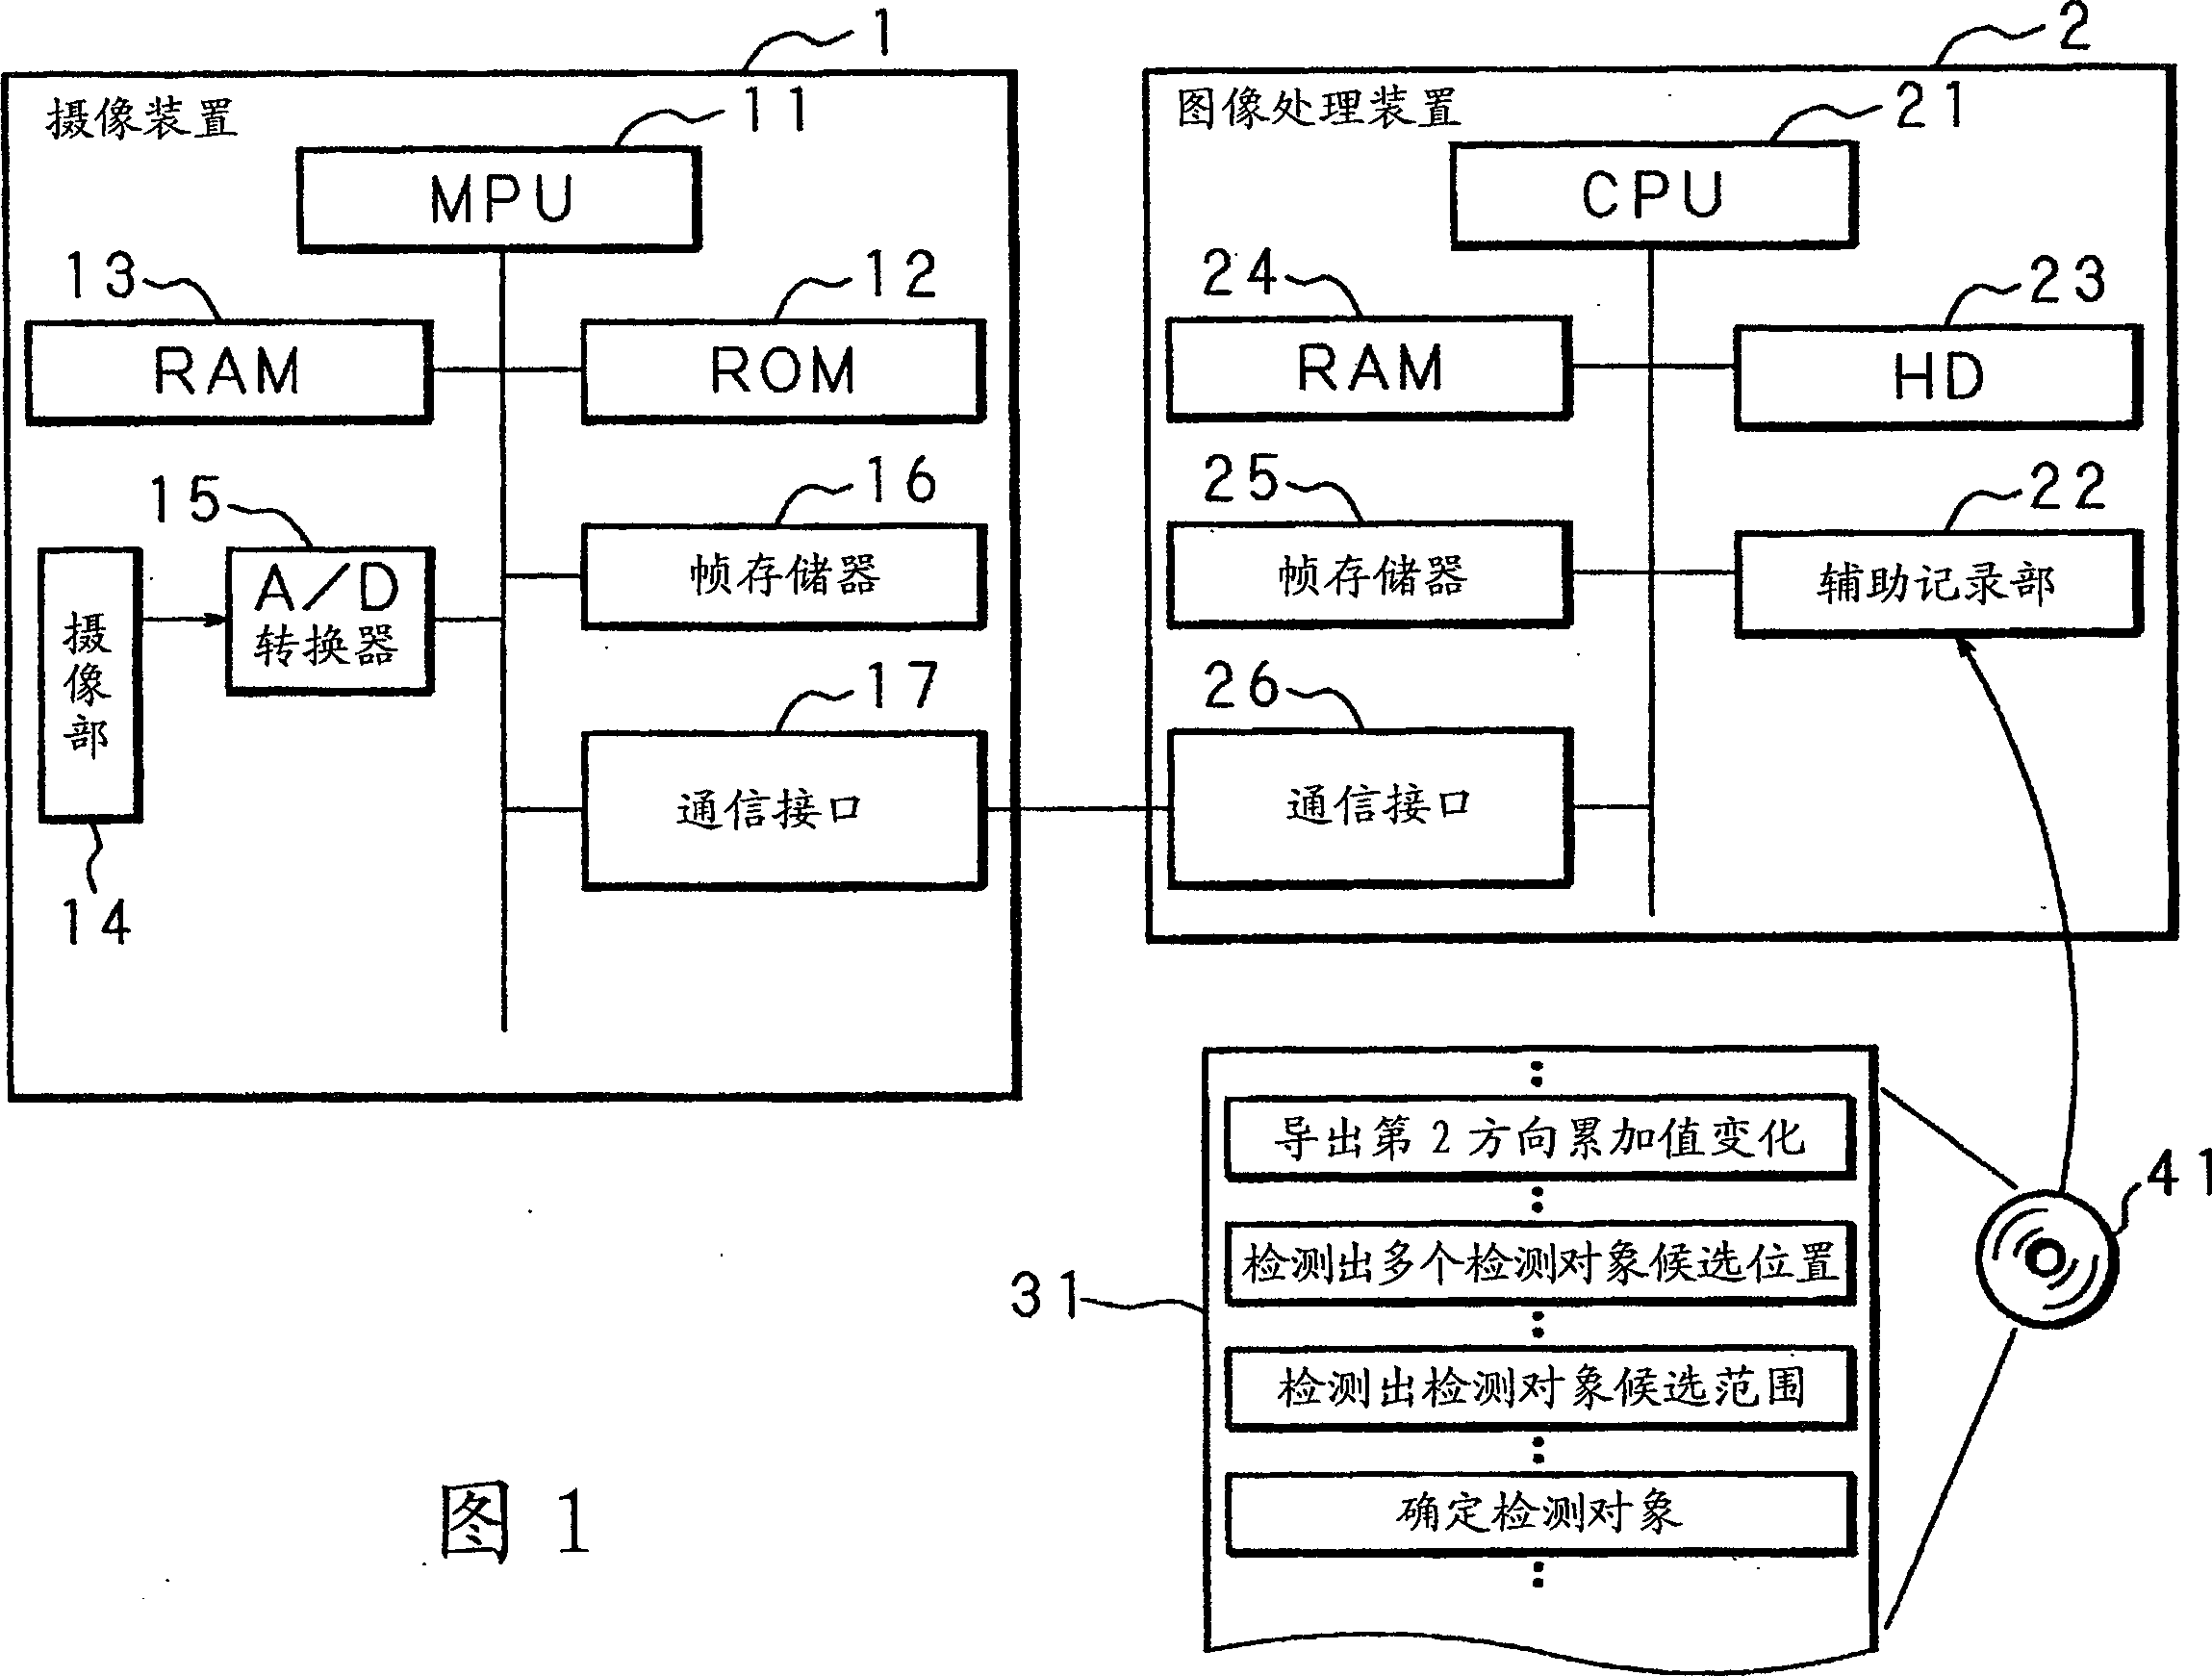 Image processing process, image processing apparatus, image processing system and computer program